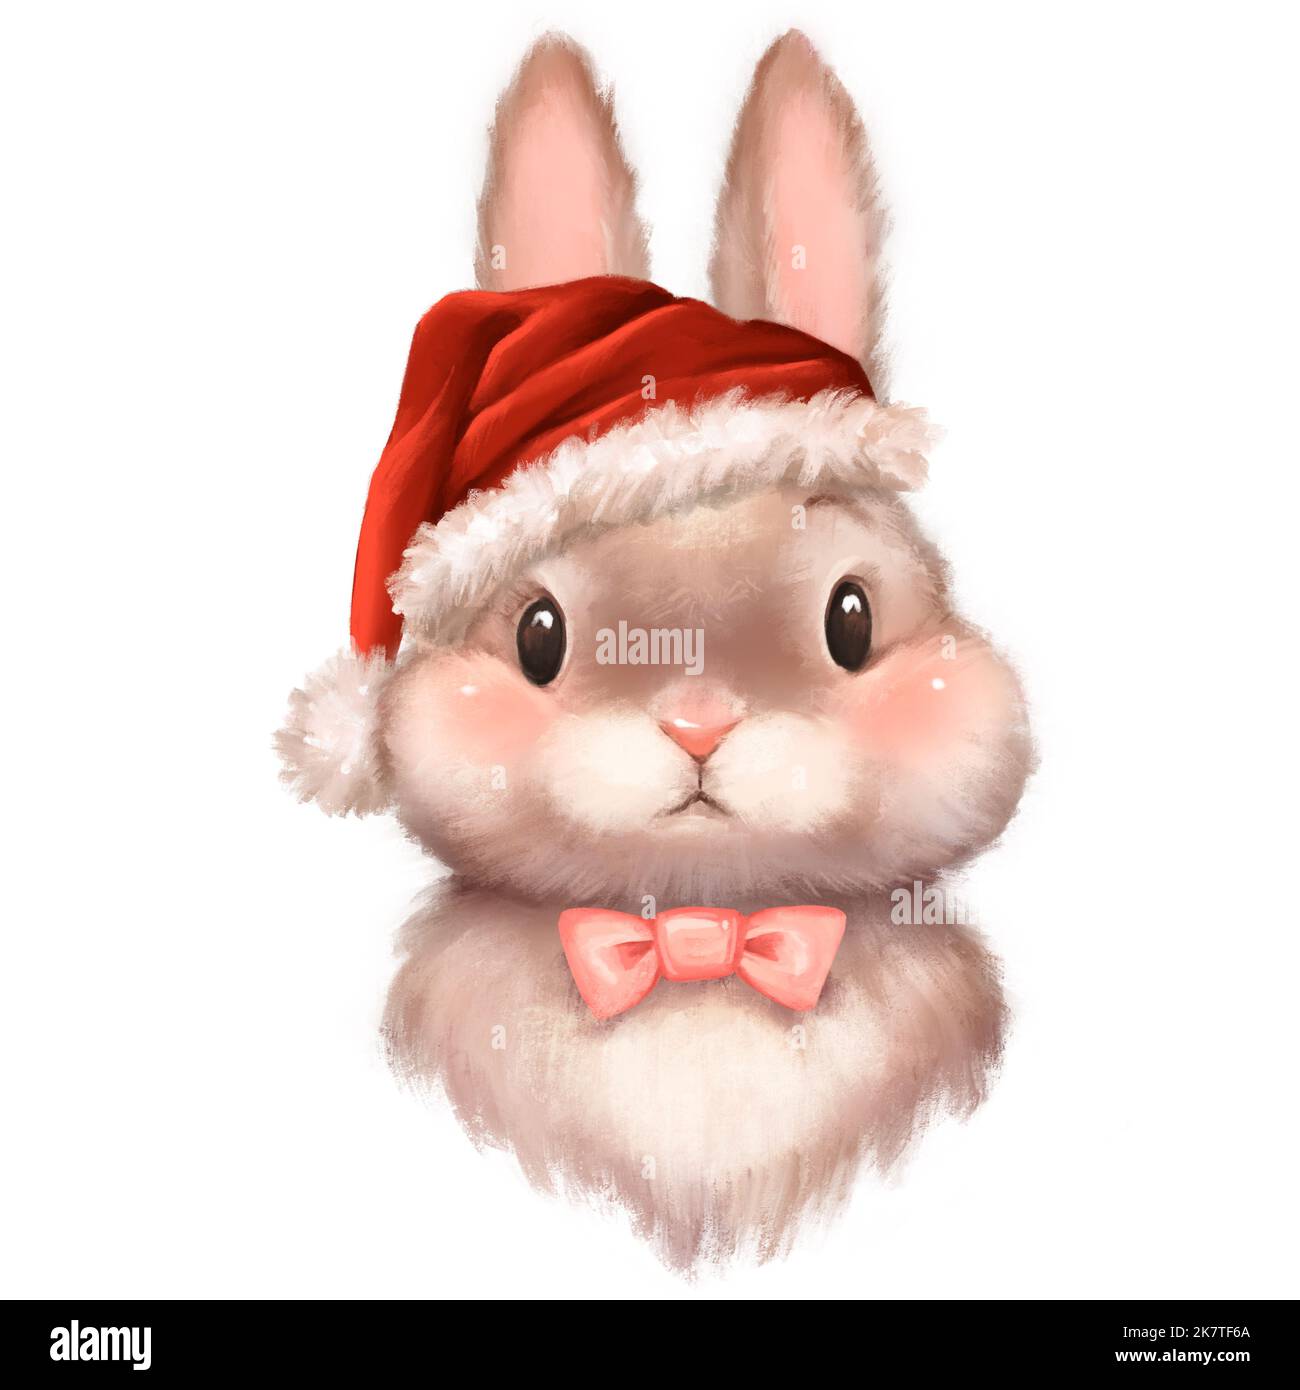 Cute bunny in Santa hat. Christmas illustration on white background Stock Photo